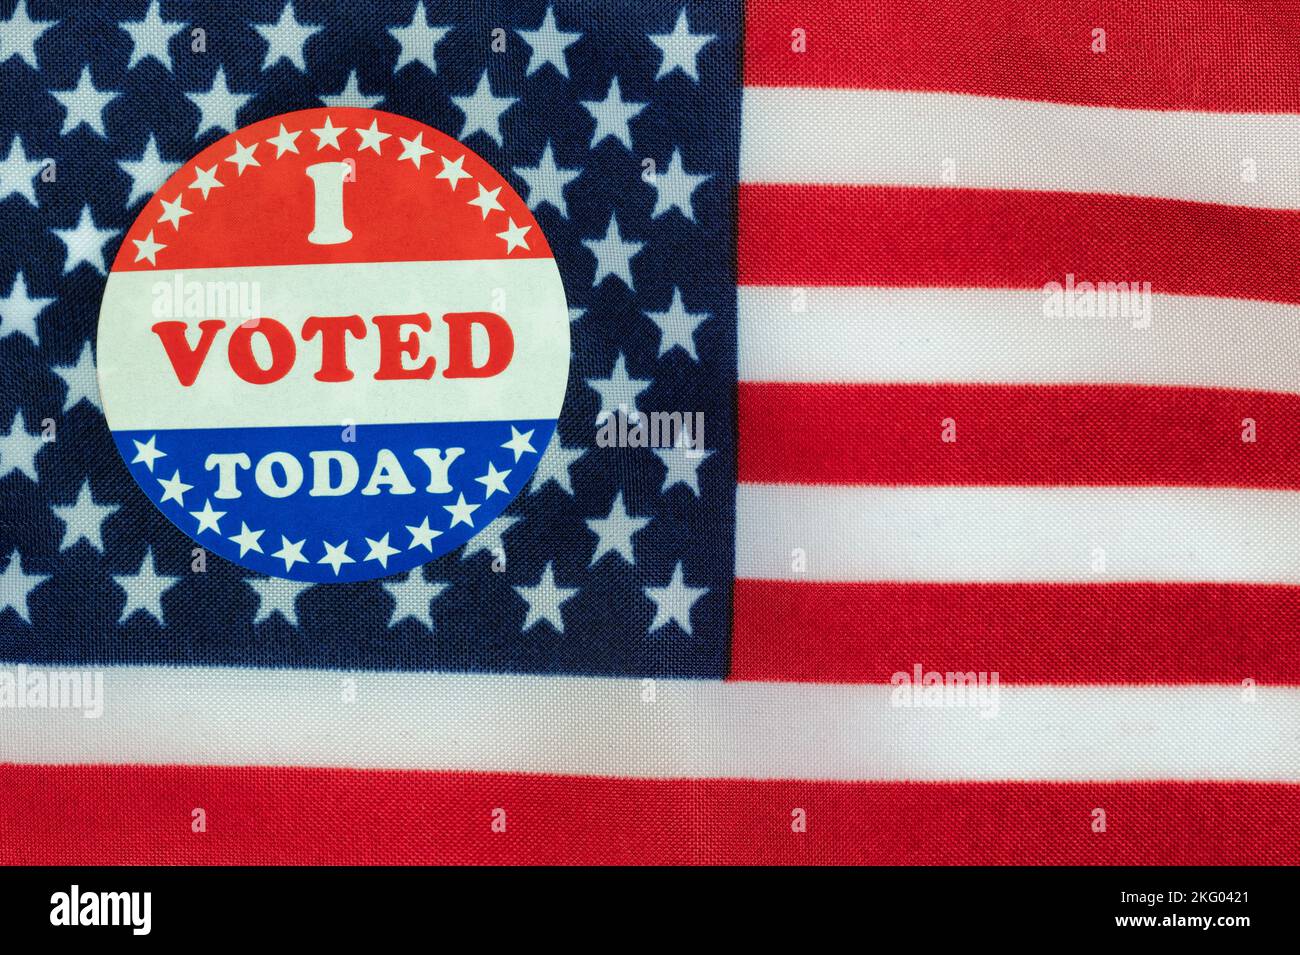 Vote sticker on United States flag background for American election campaign concept Stock Photo